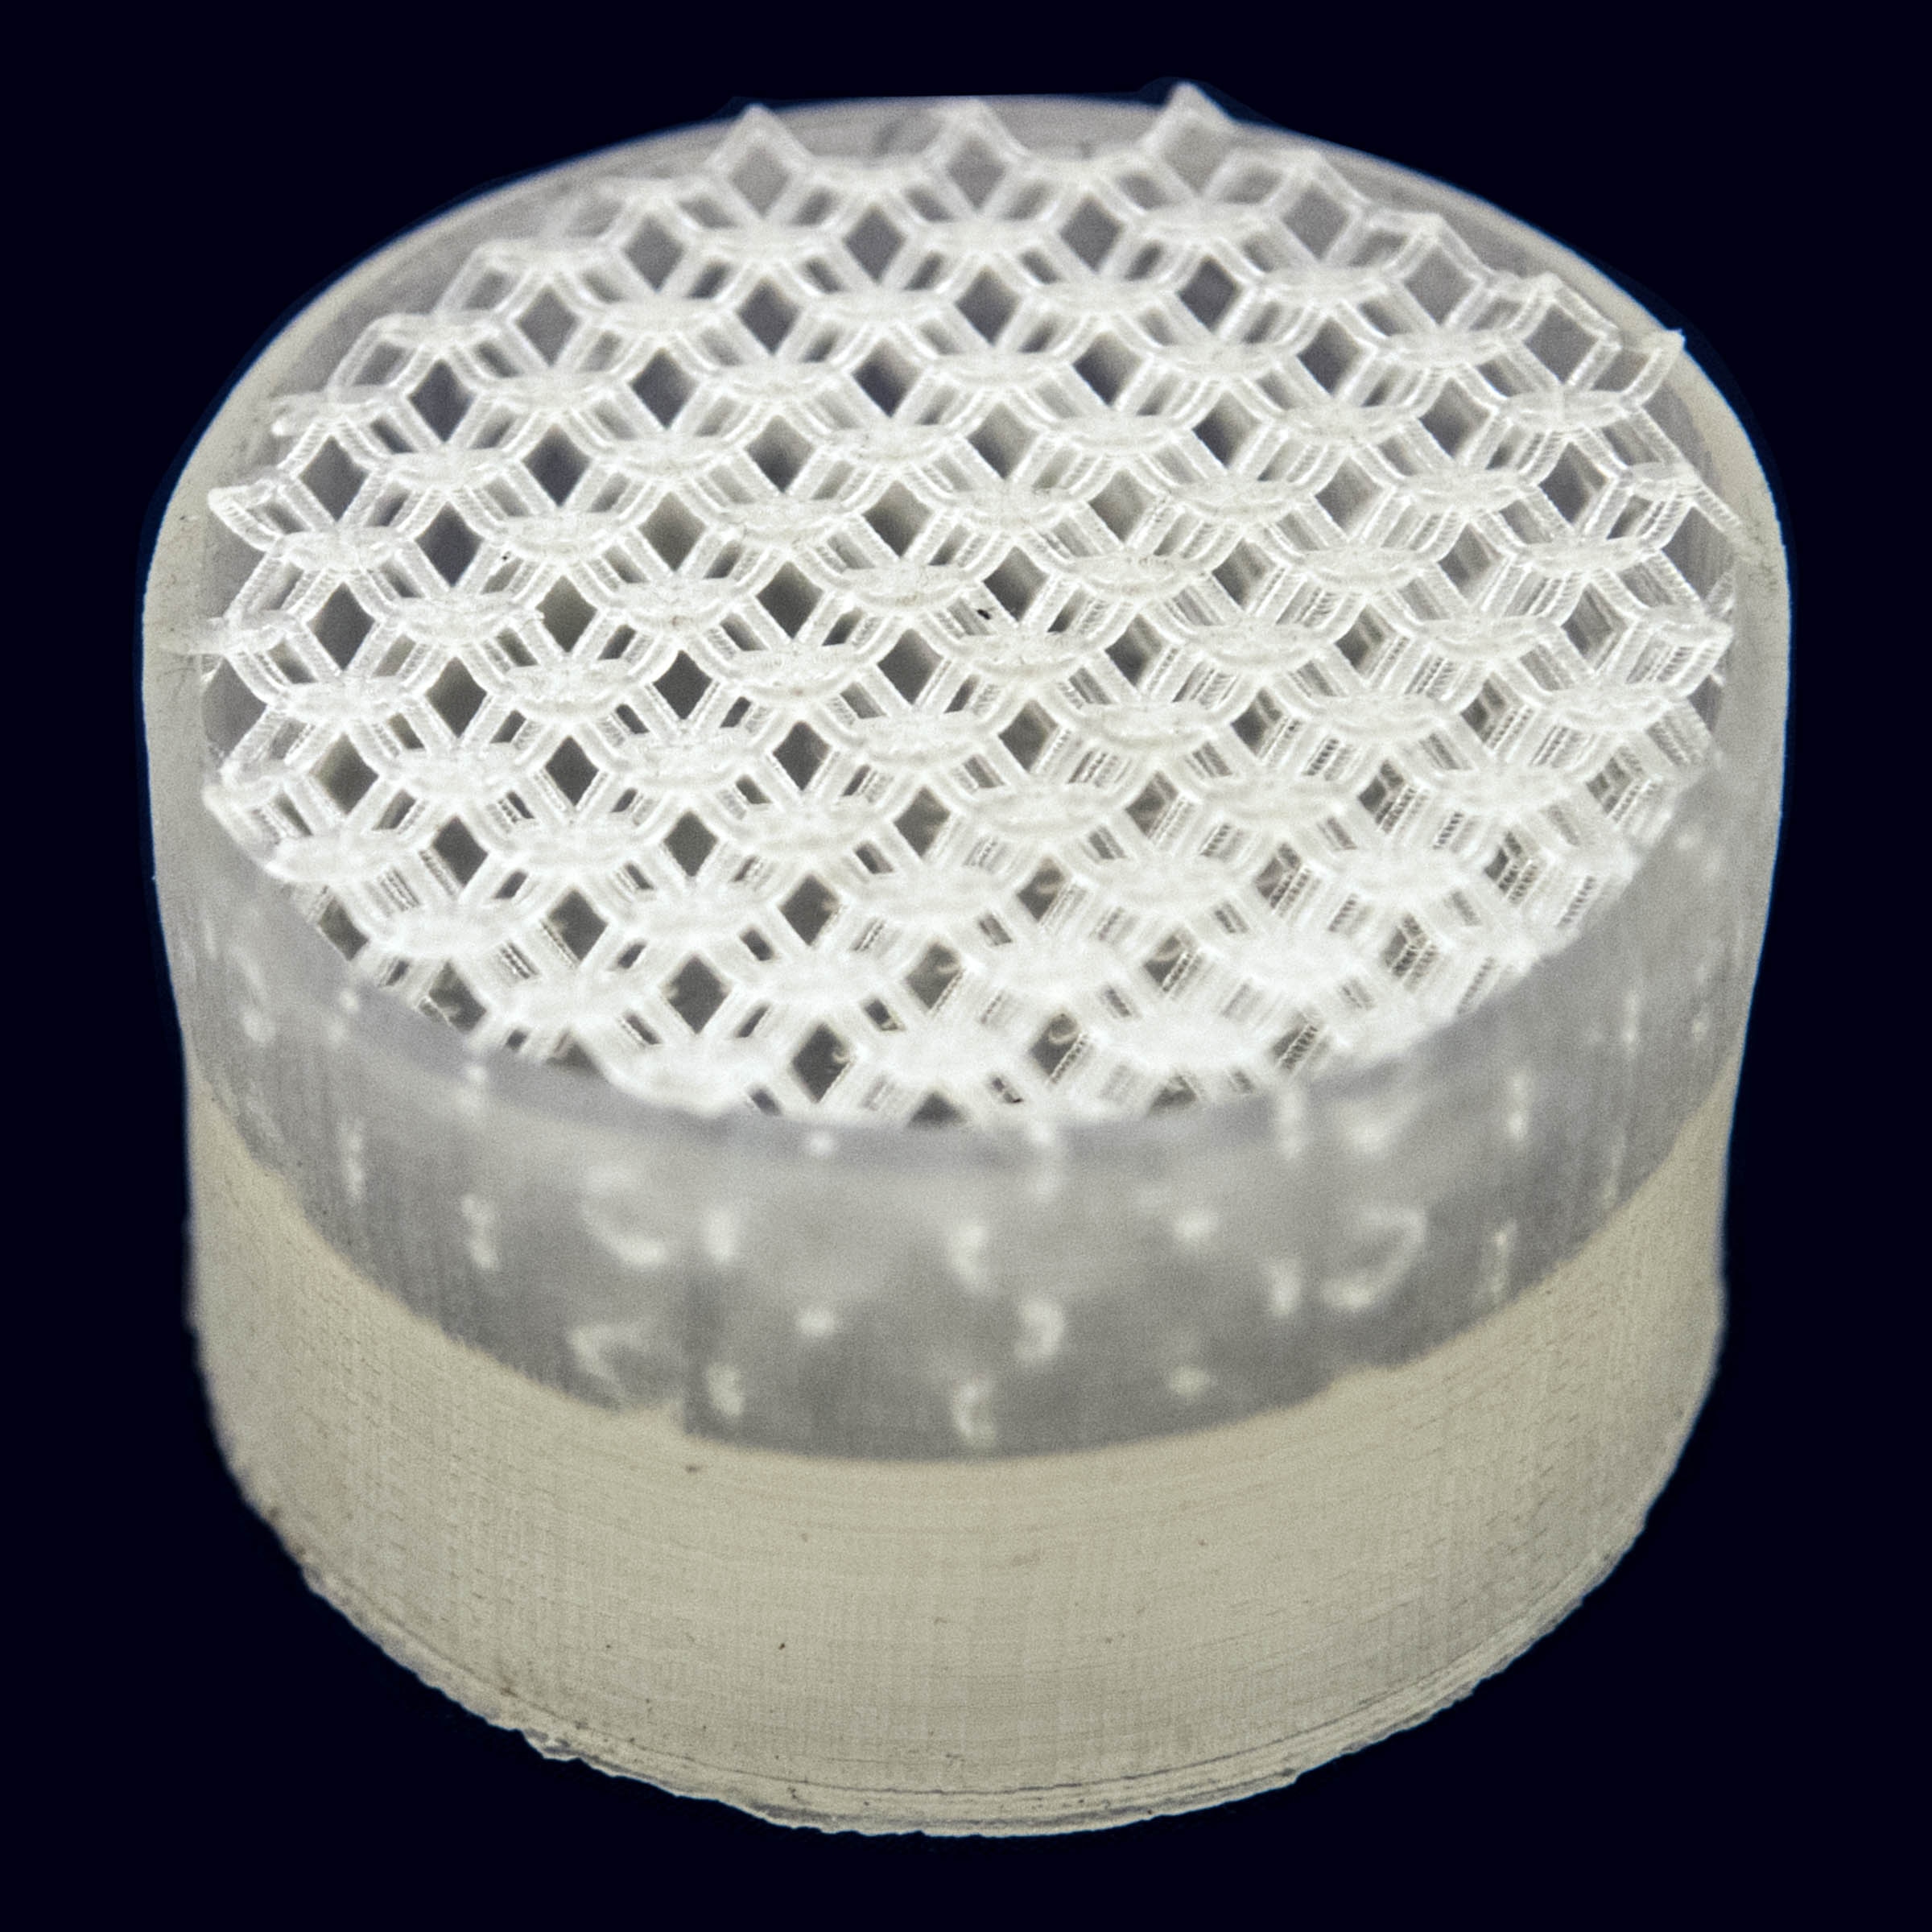 World's Highest Strain 3D Printable Photopolymer Introduced at RAPID + TCT